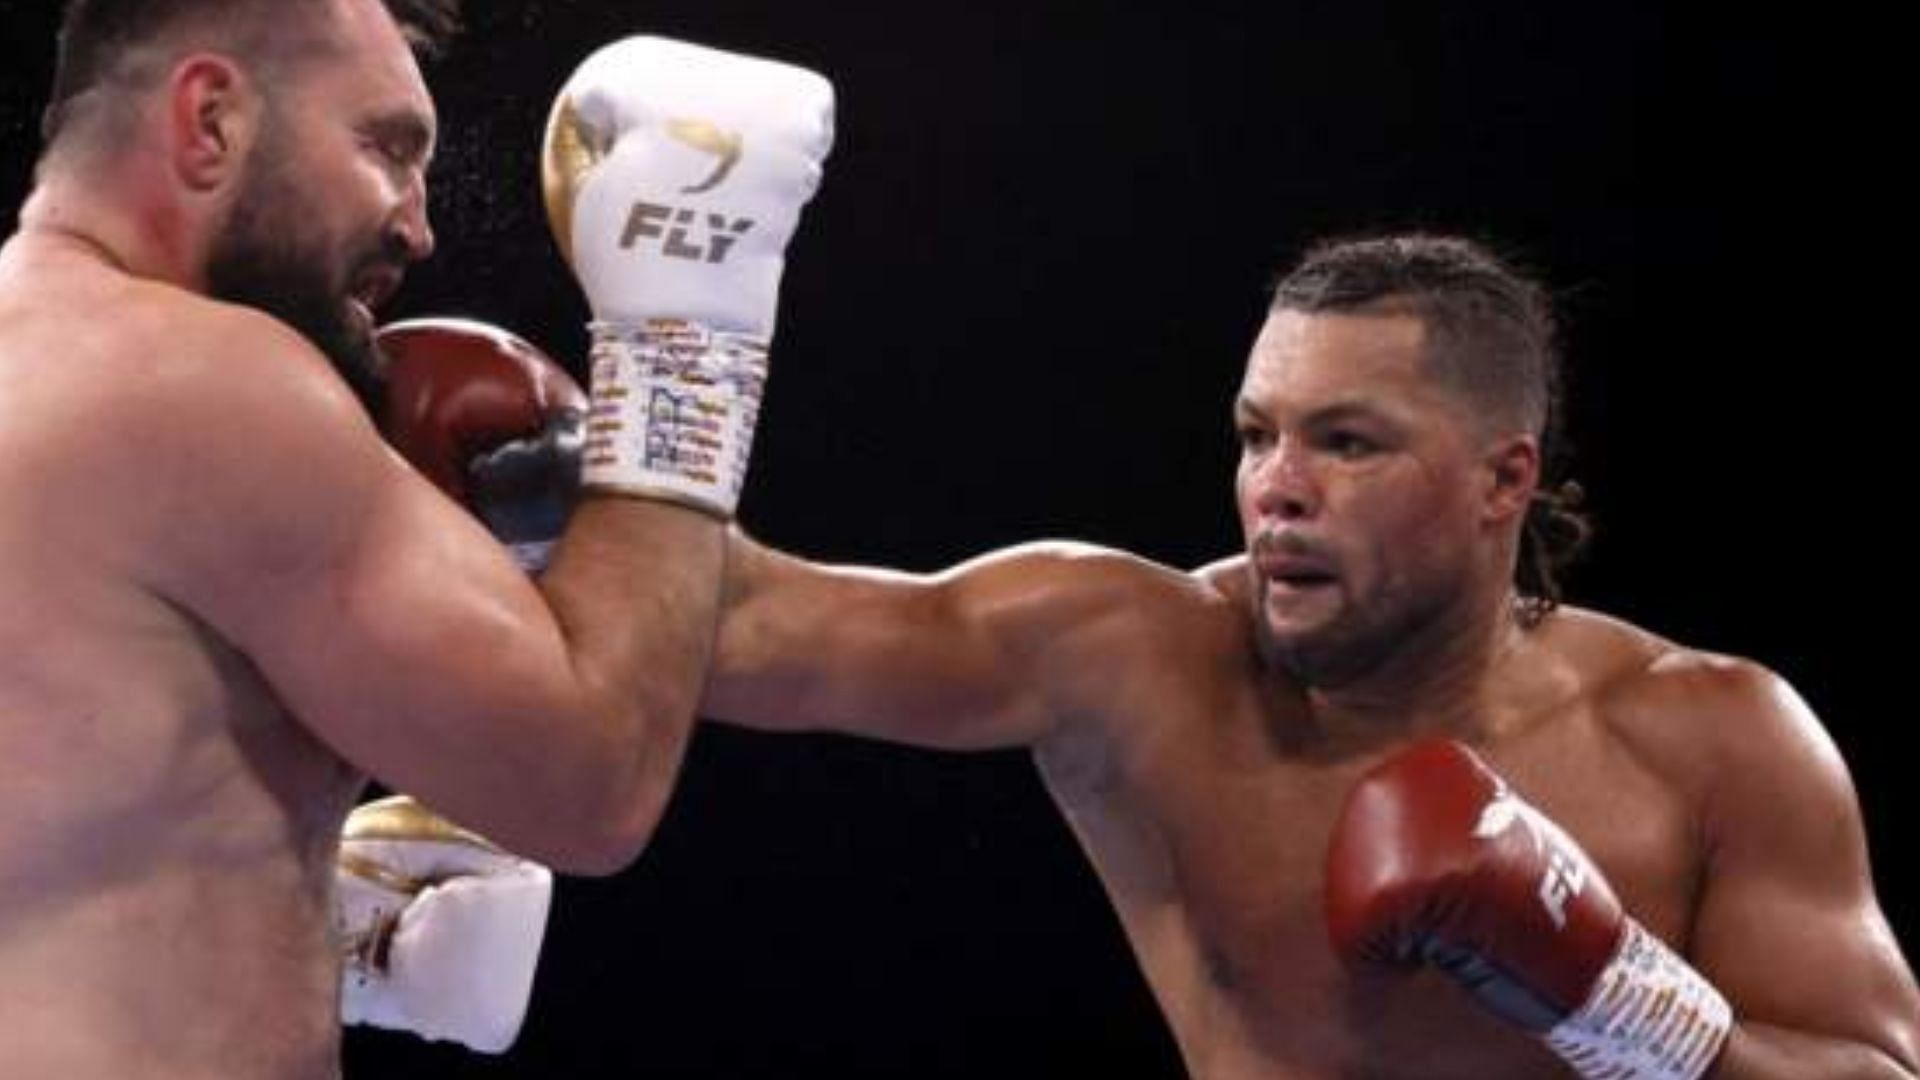 Joe Joyce stopped his opponent to keep his undefeated streak